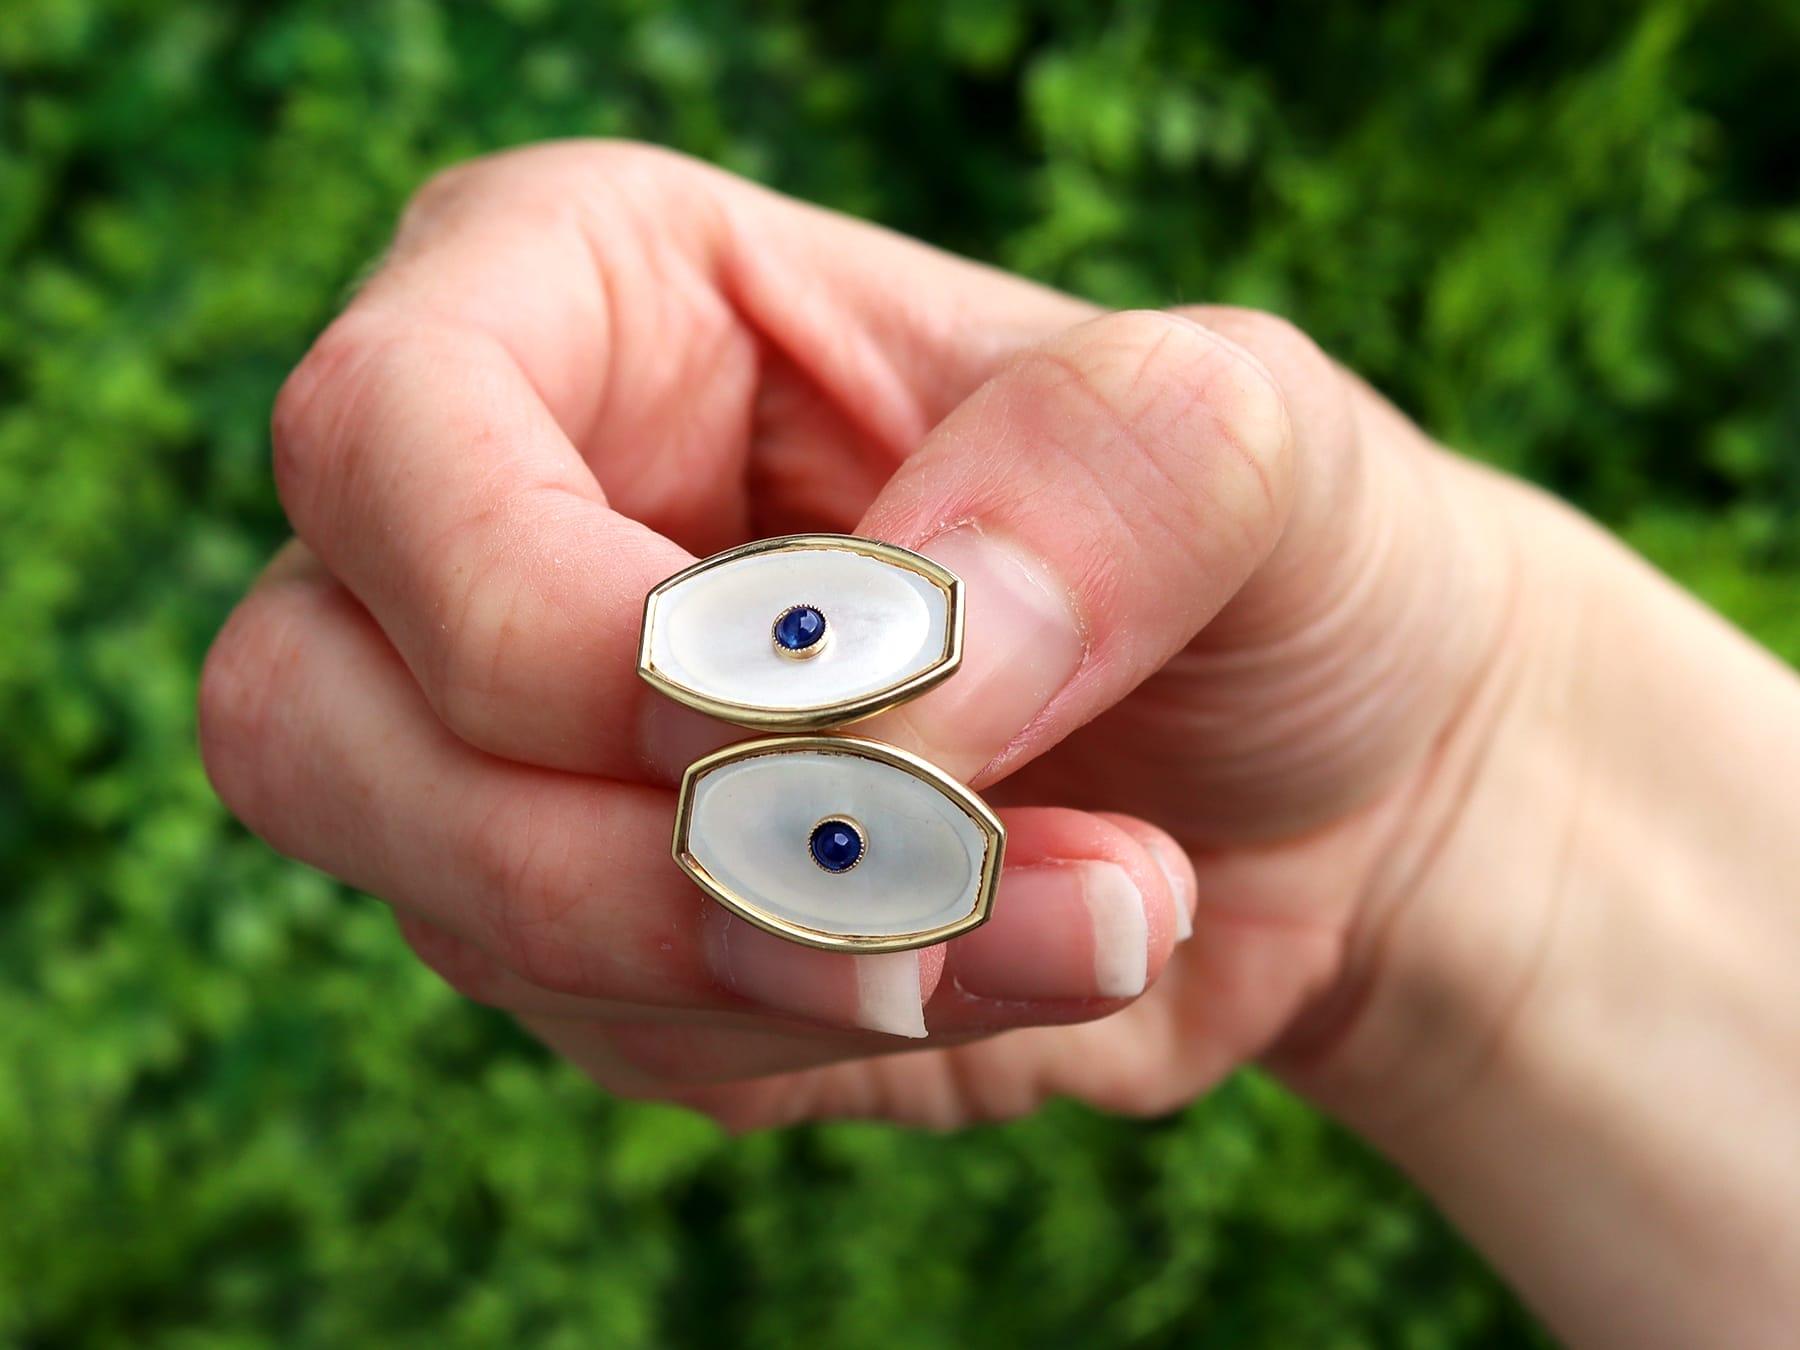 An impressive pair of antique mother of pearl and 0.12 carat sapphire, 14 karat yellow gold cufflinks; part of our diverse antique jewelry and estate jewelry collections.

These fine and impressive antique cufflinks have been crafted in 14k yellow